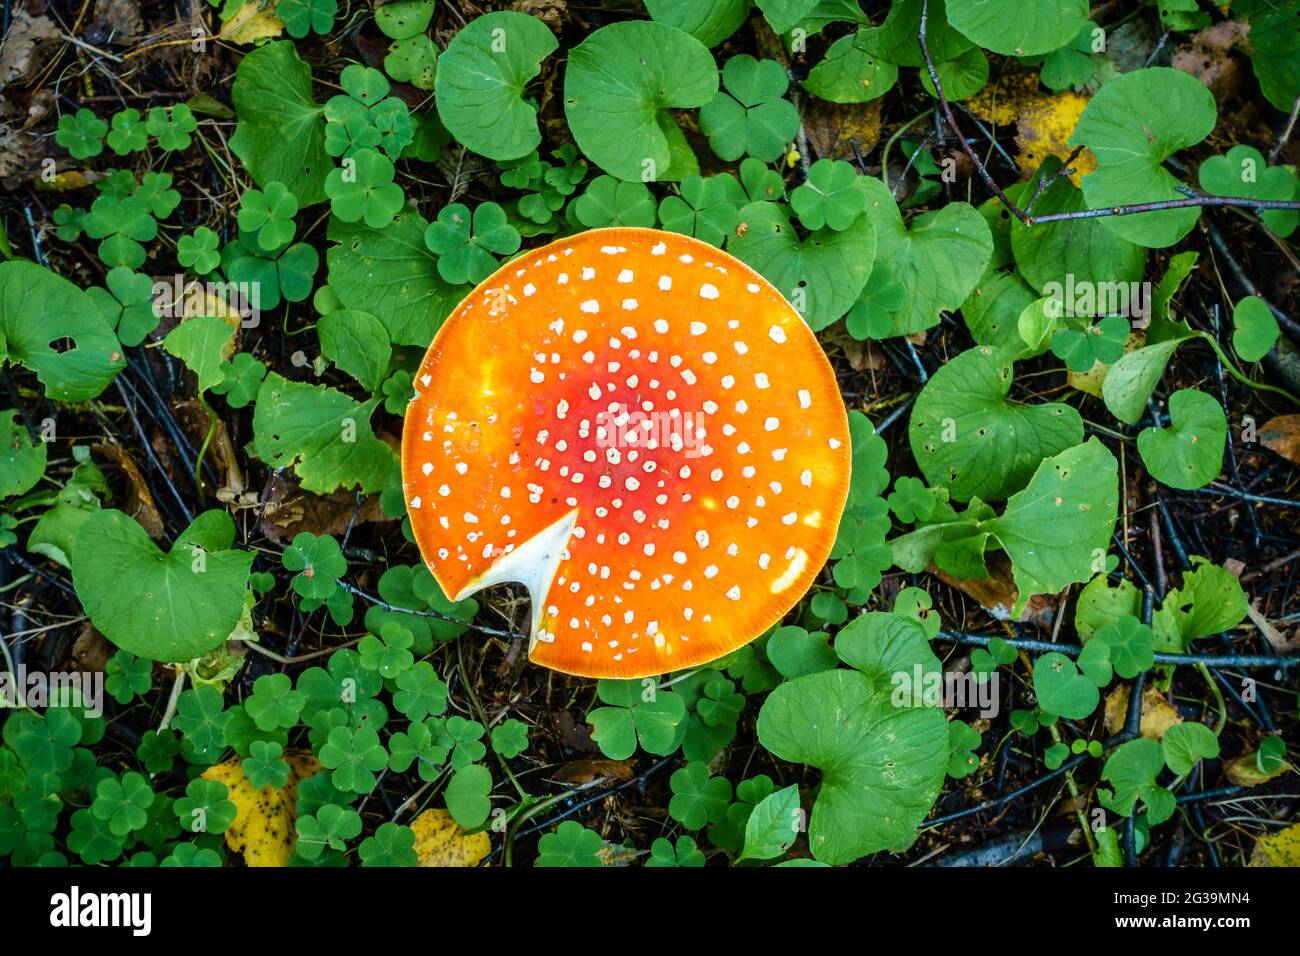 Top-down view of amanita mushroom cap in a Russian forest Stock Photo